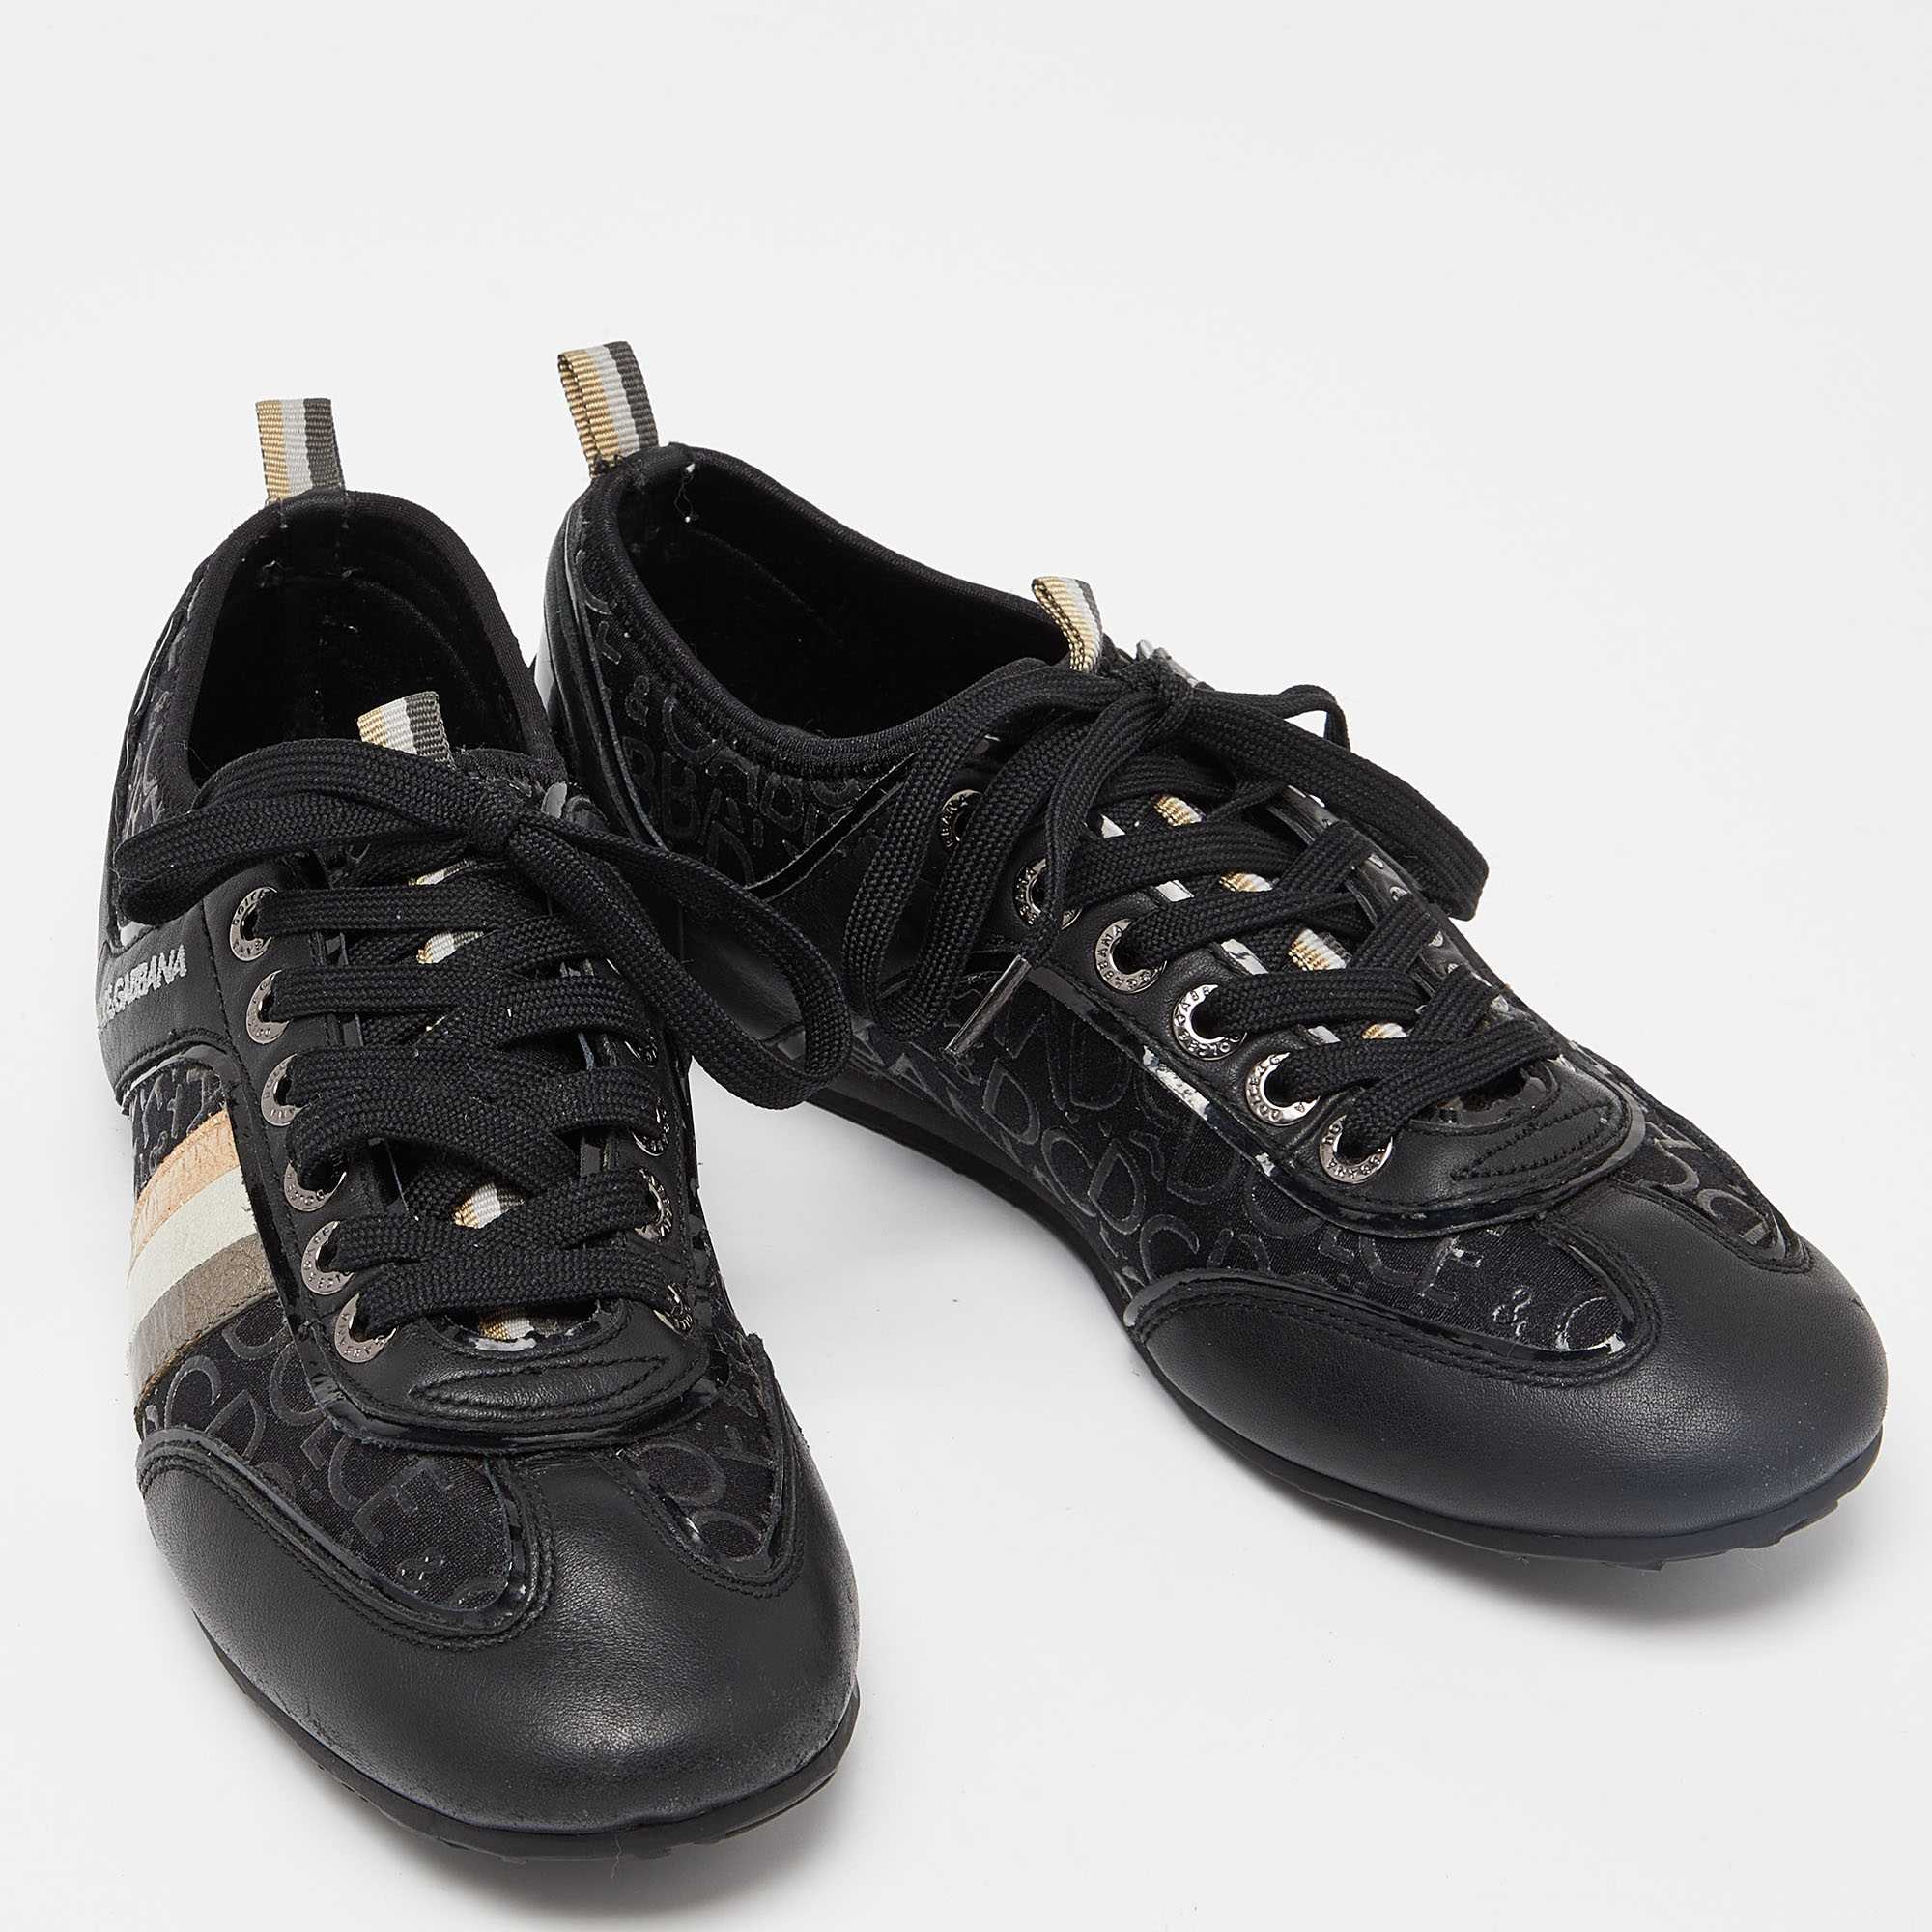 Dolce & Gabbana Black Leather And Fabric Logo Lace Up Sneakers Size 41